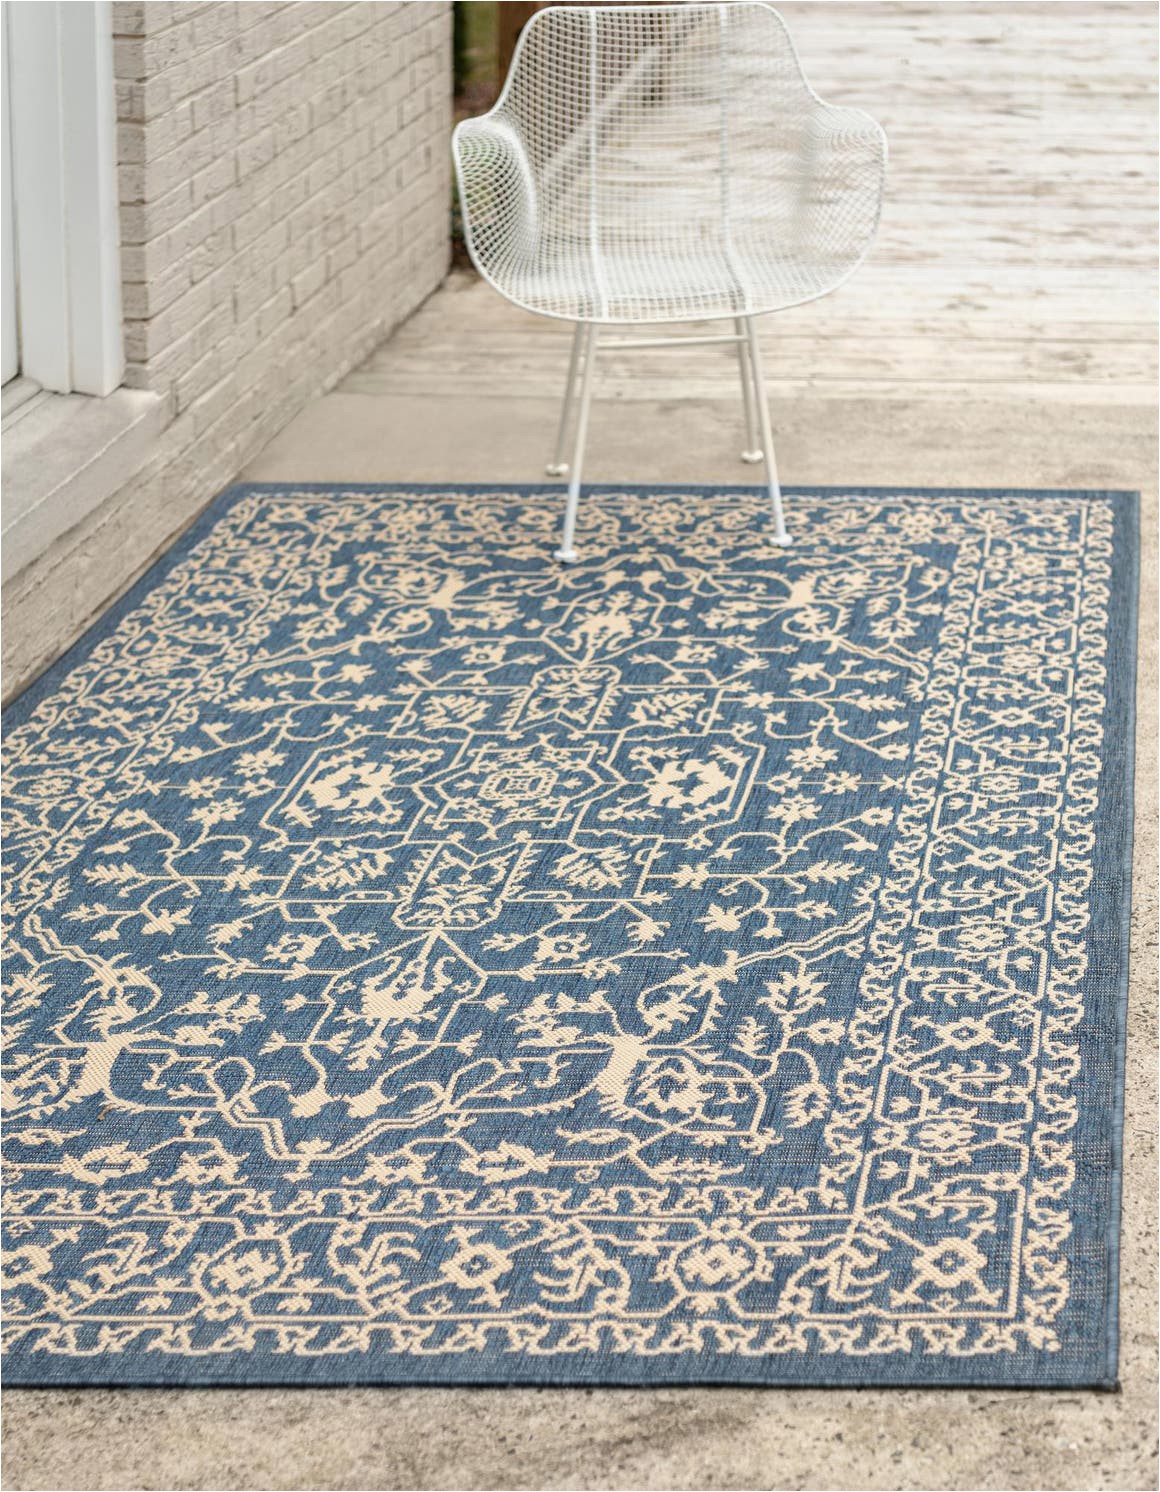 4×6 Blue Outdoor Rugs 4 X 6 Outdoor Botanical Rug